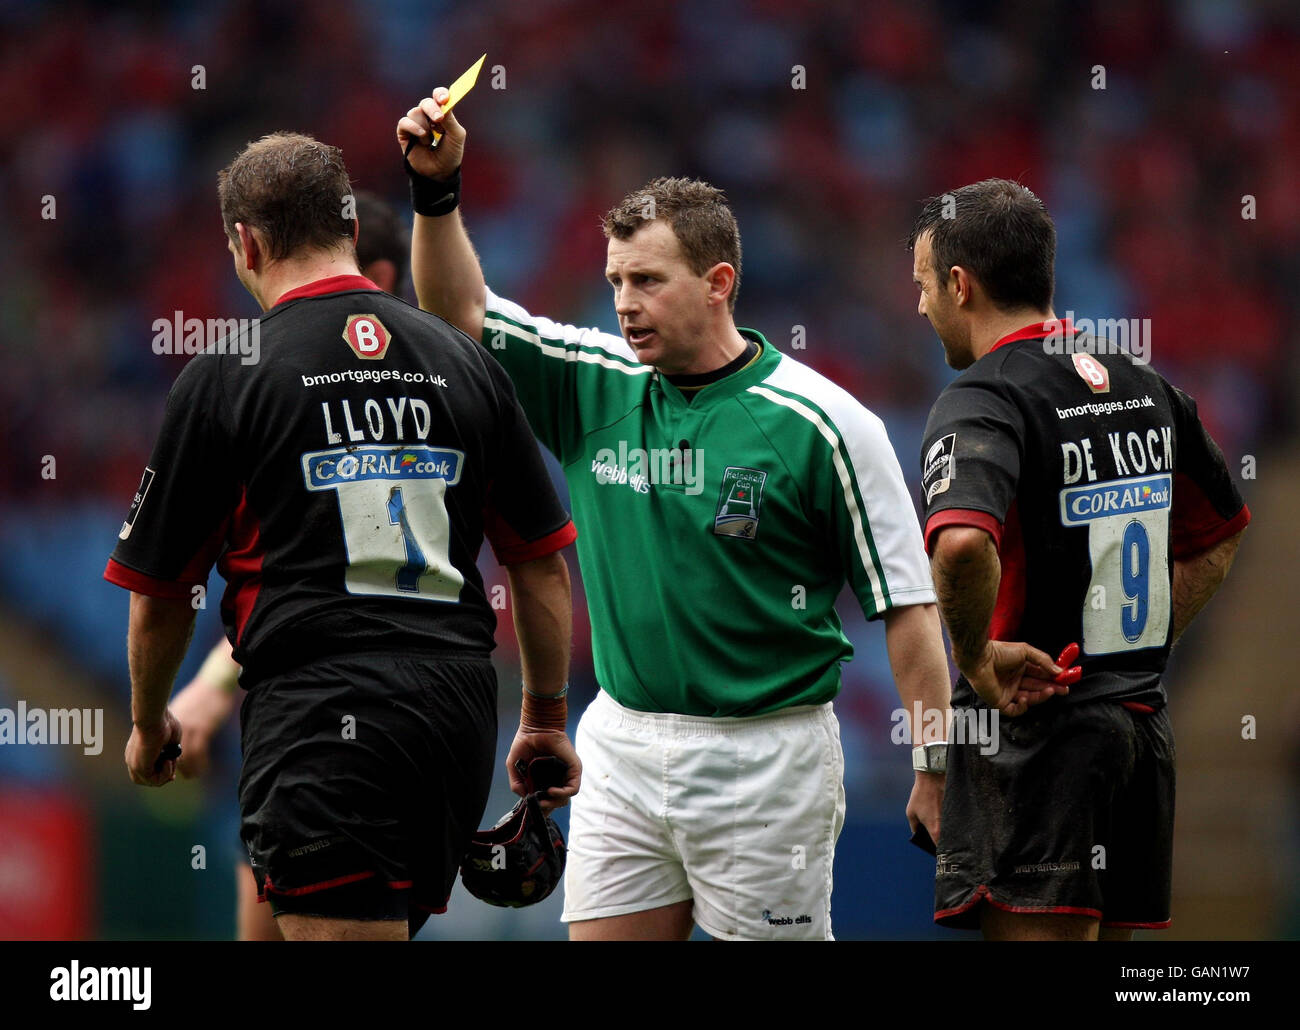 Referee Nigel Owens sin bins Saracens Nick Lloyd during the Heineken Cup Semi Final at the Ricoh Arena, Coventry. Stock Photo